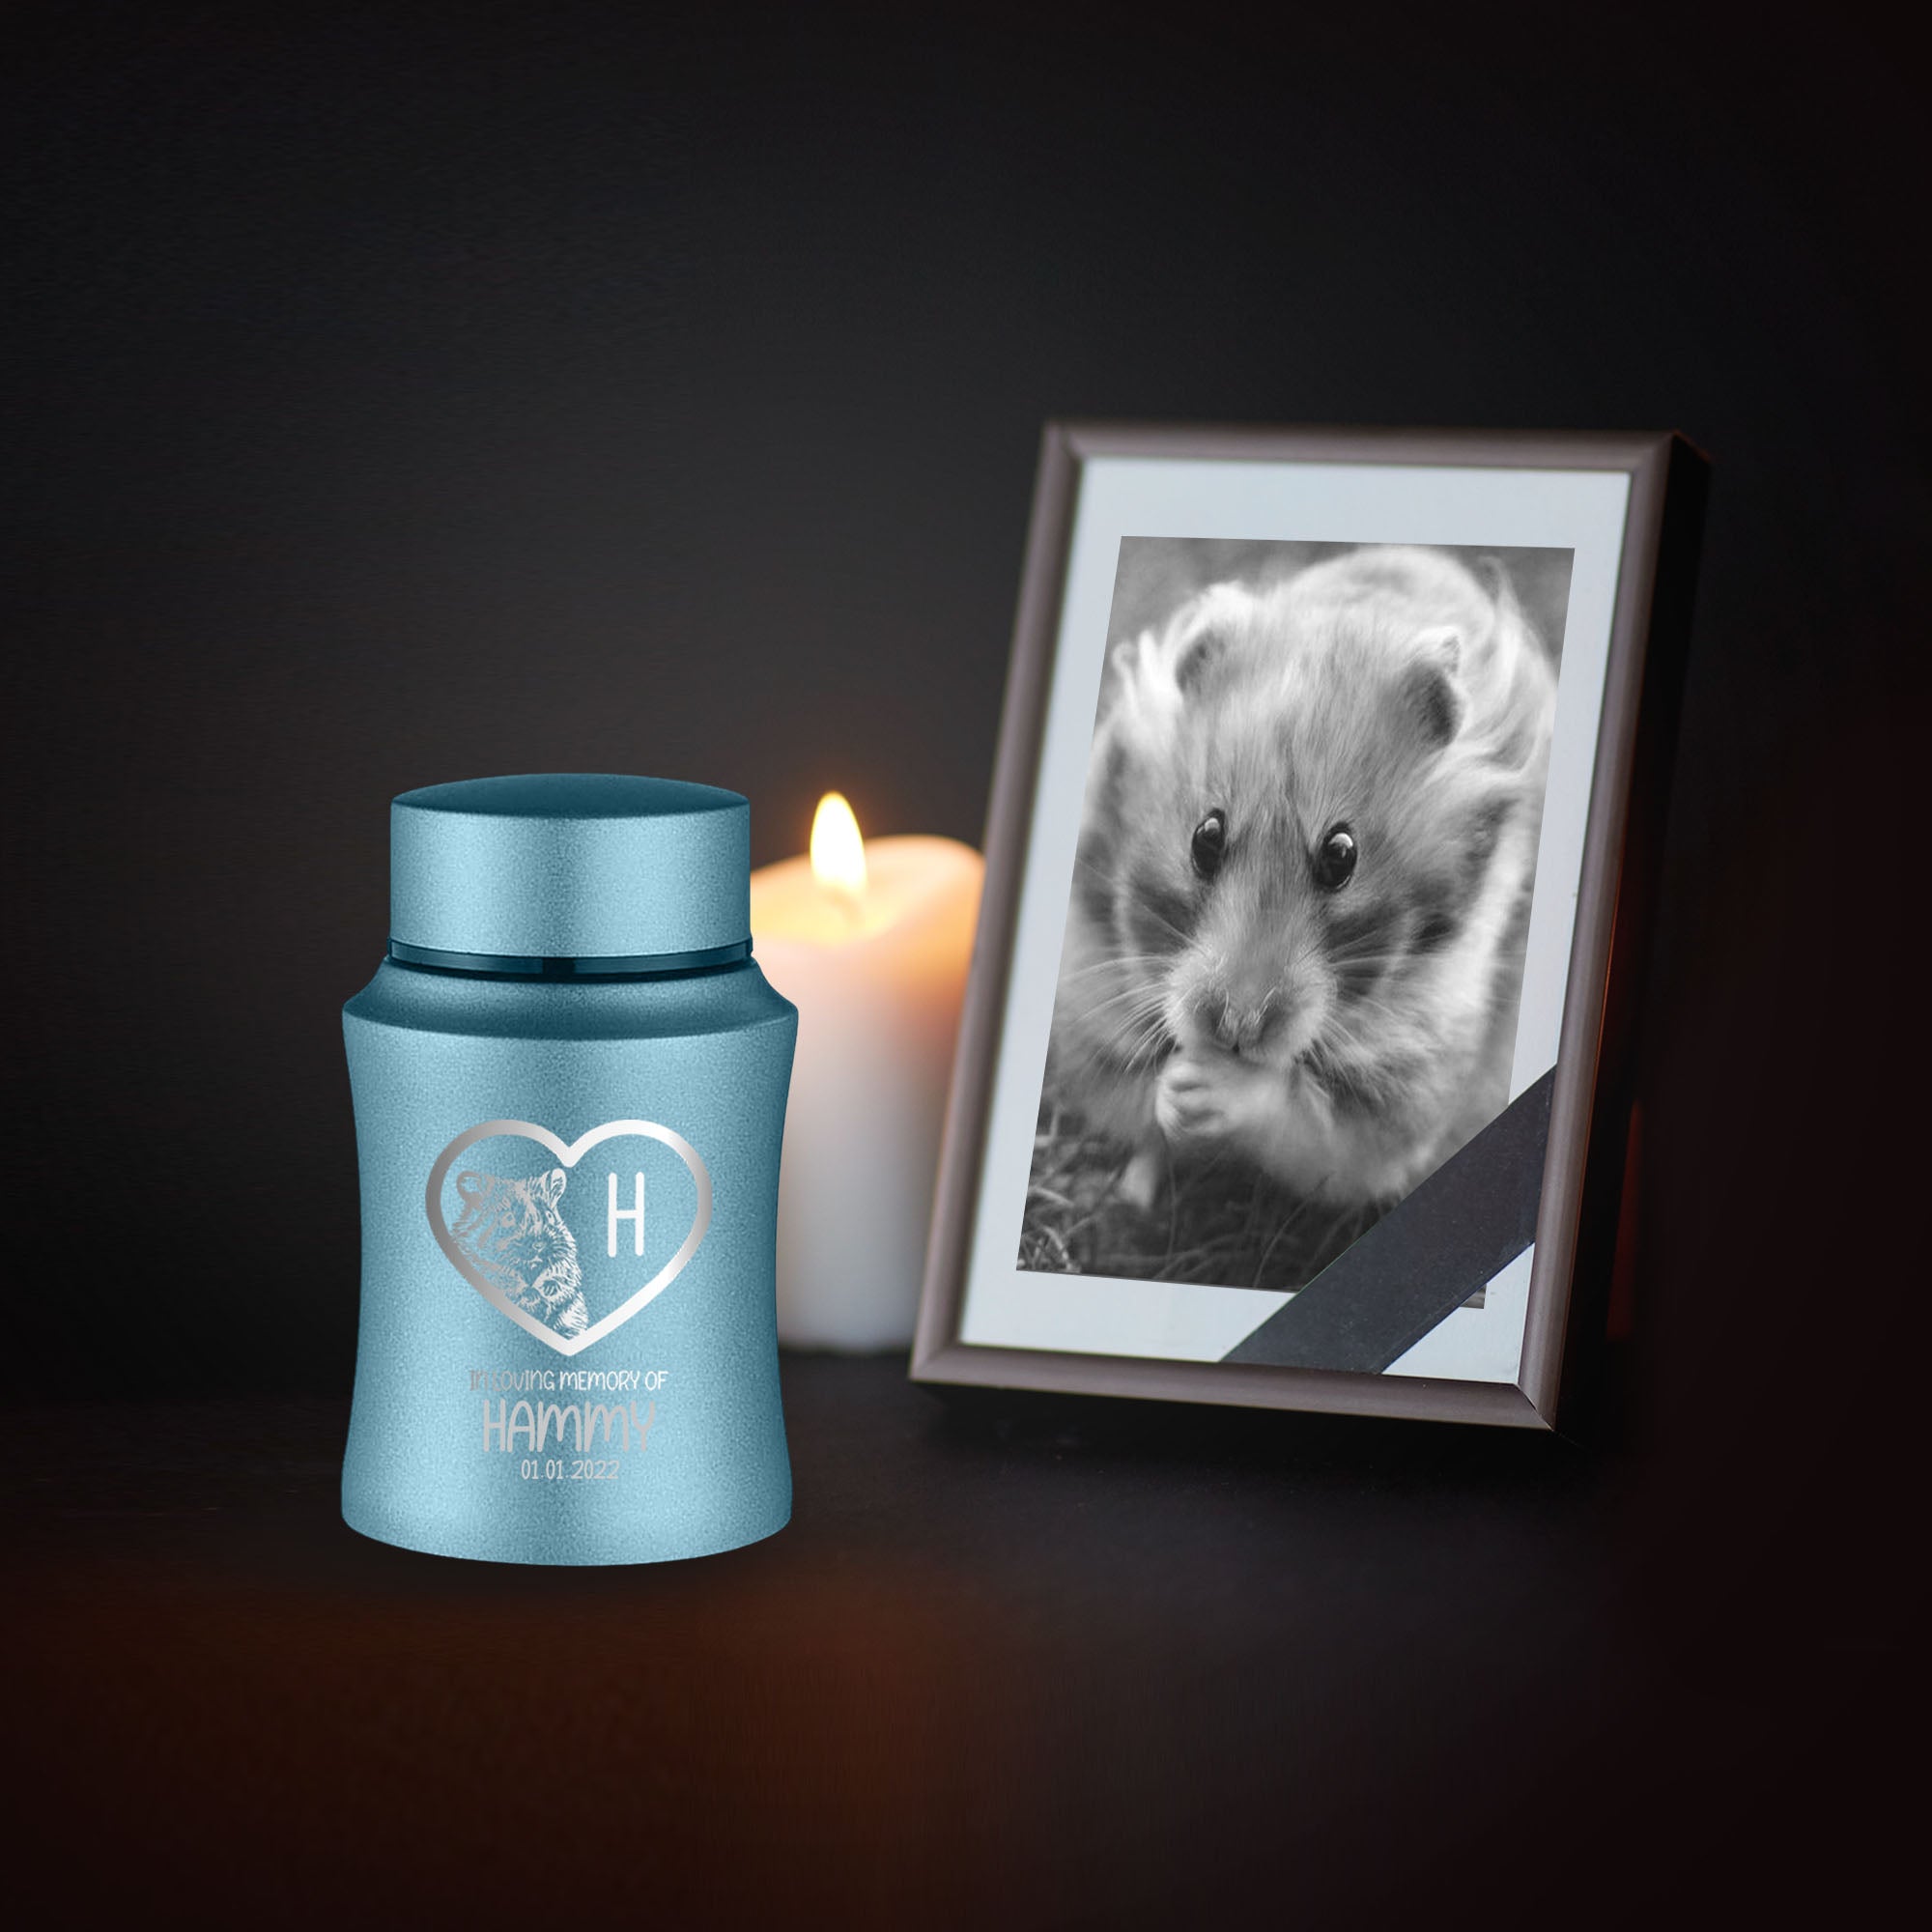 Customized Small Keepsake Urn Personalized Engraved with Pet Name, Date, and Text - 4" Powder Coated Cremation Mini Compact Urn for Hamster Ashes | 5–10 Lbs Capacity.